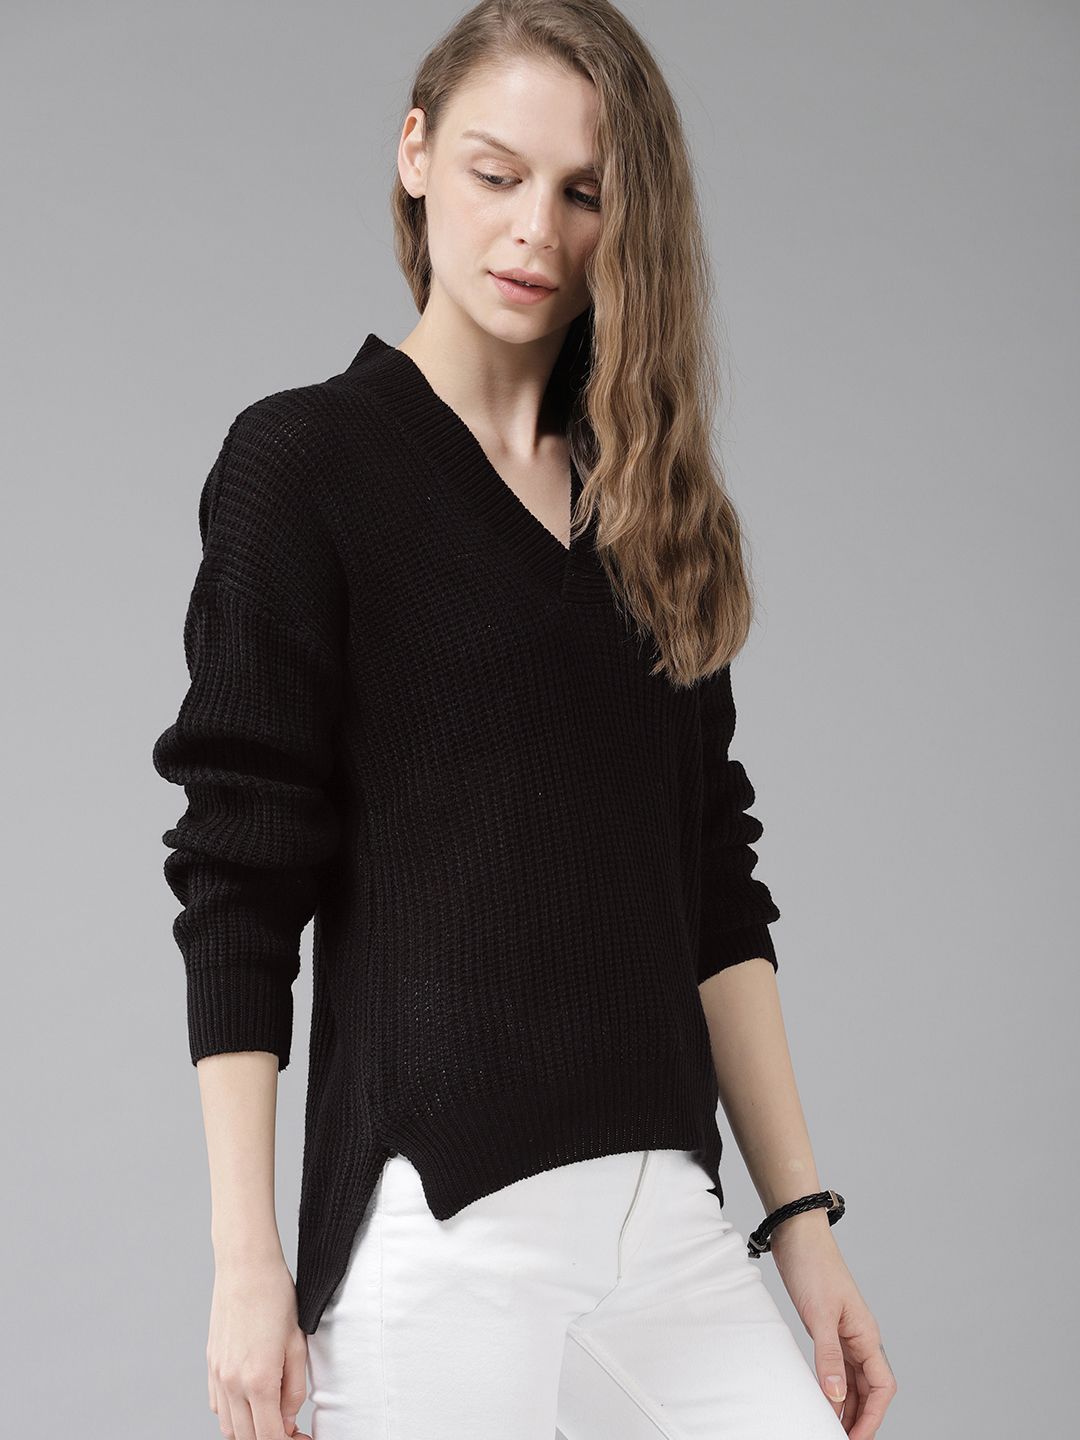 The Roadster Lifestyle Co Women Black Solid Sweater Price in India